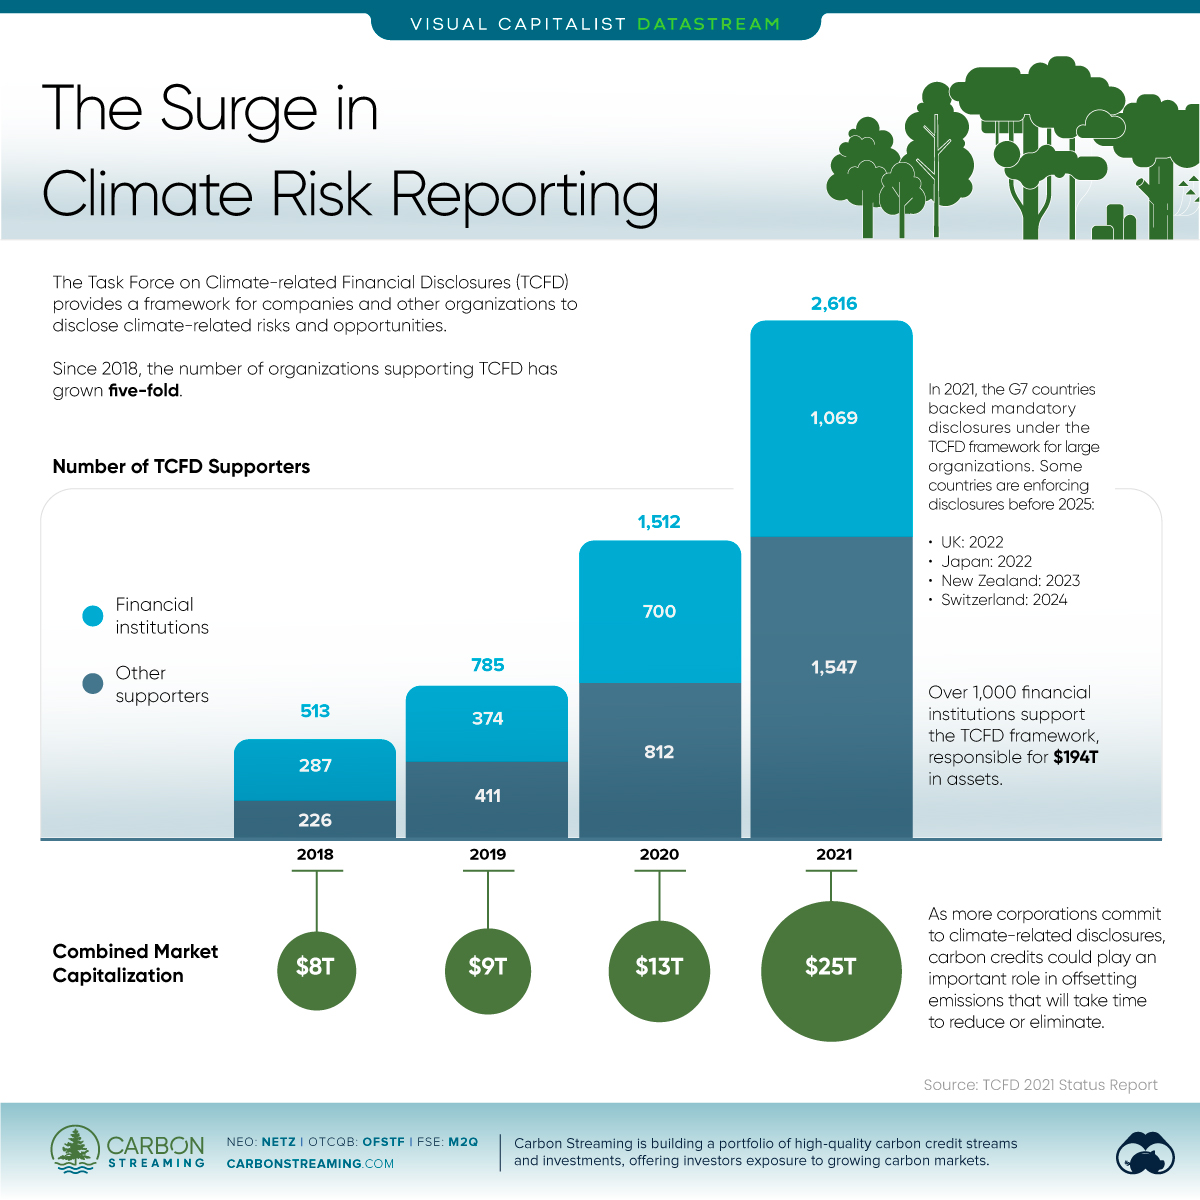 The Surge in Climate Risk Reporting